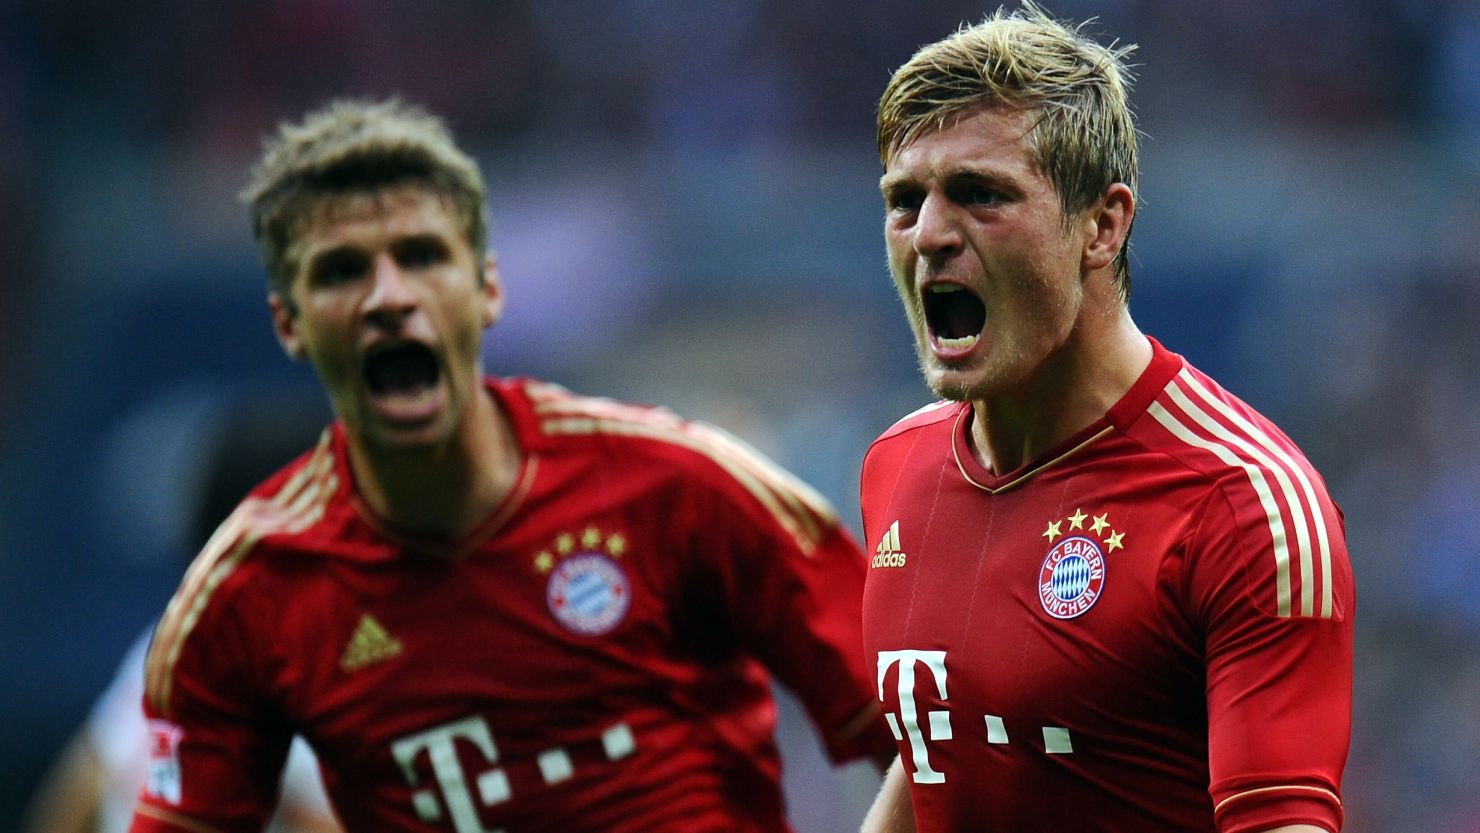 Tony Kroos celebrates scoring Bayern's second goal with help from teammate Thomas Mueller.